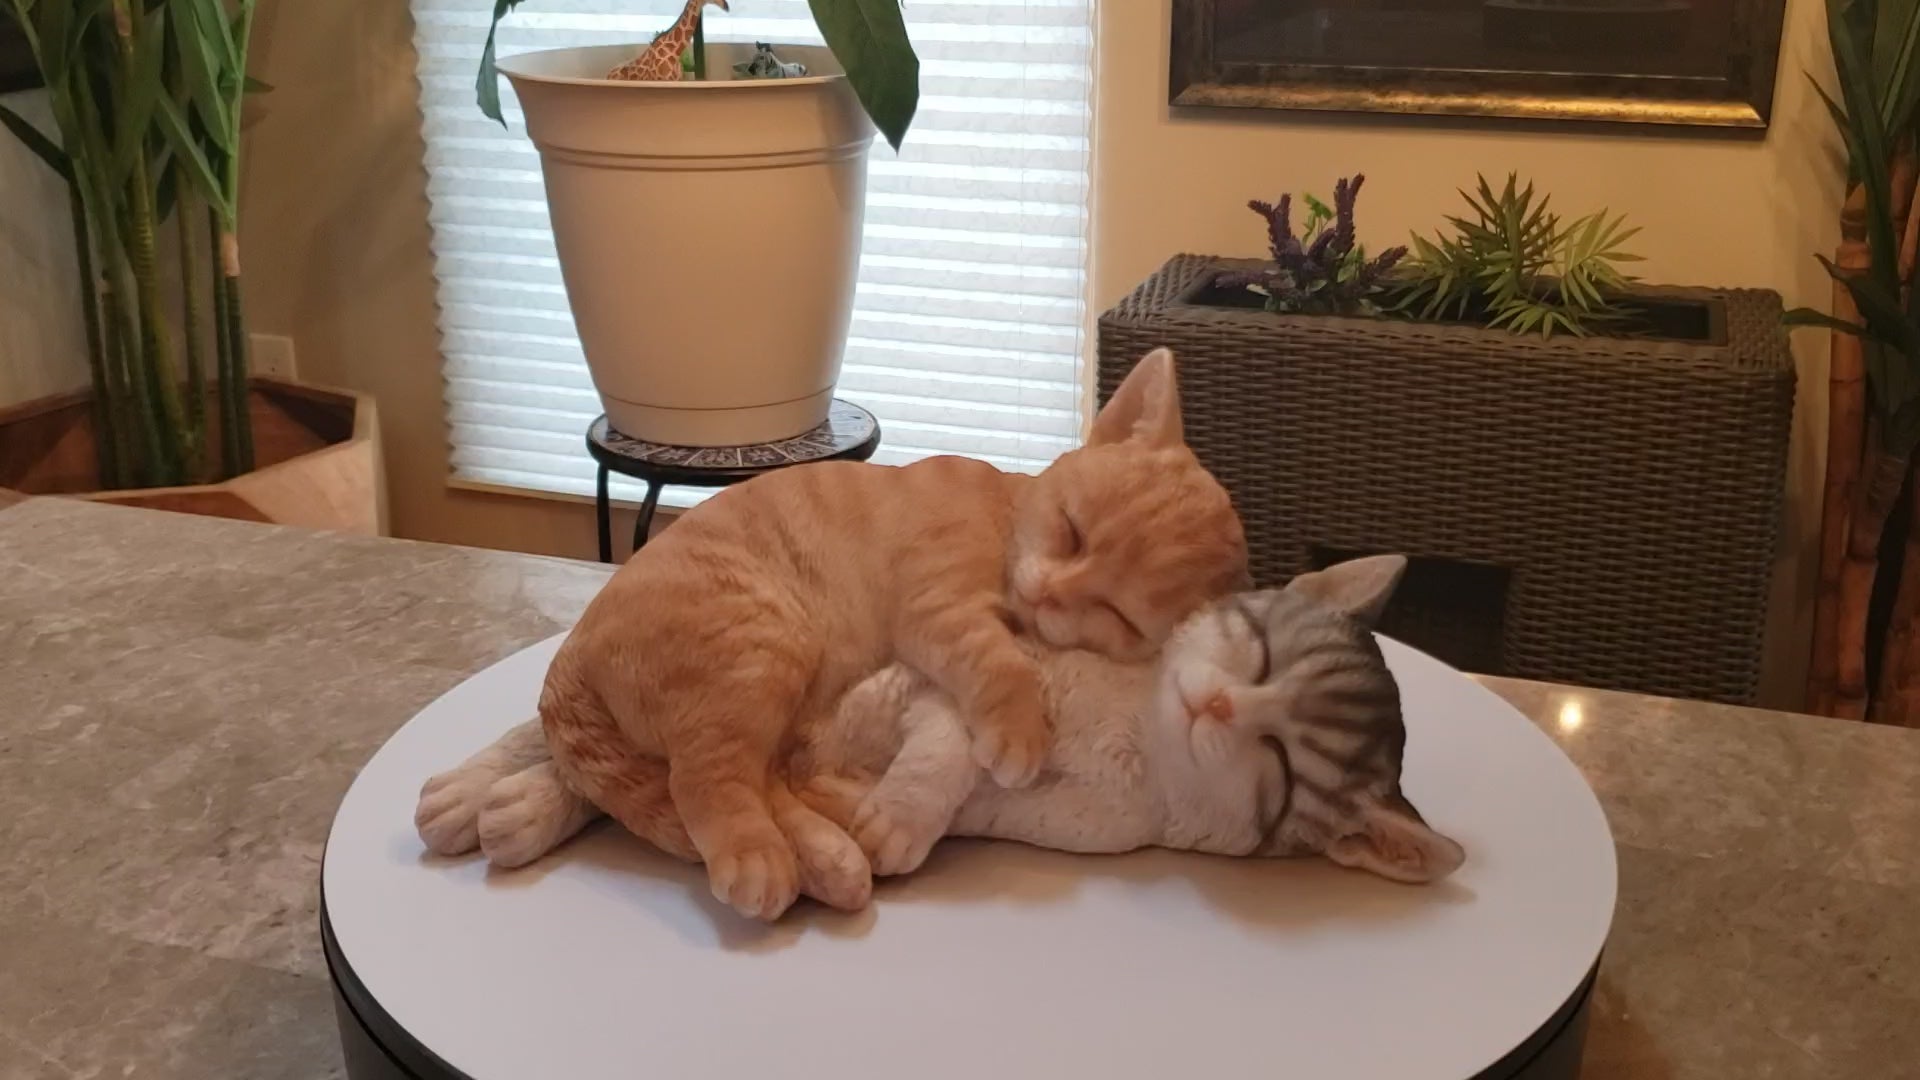 Auction for sale tabby cat pair statue